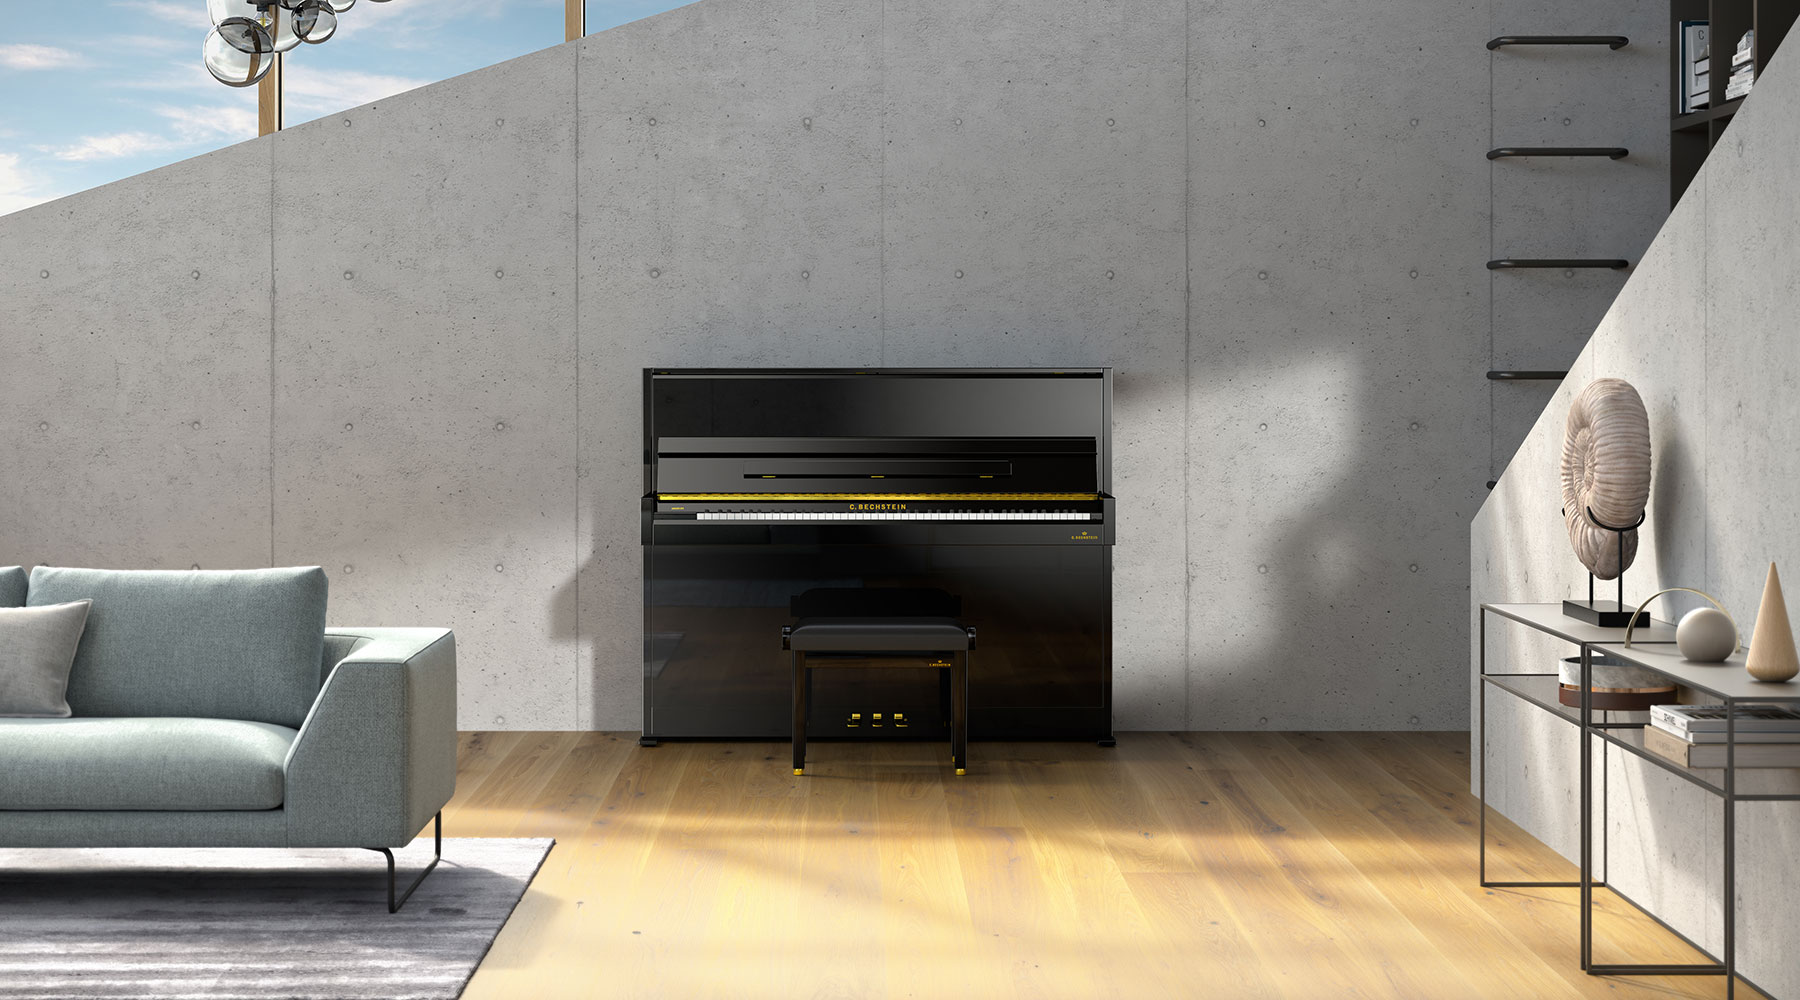 C. Bechstein upright piano in a minimalist living room